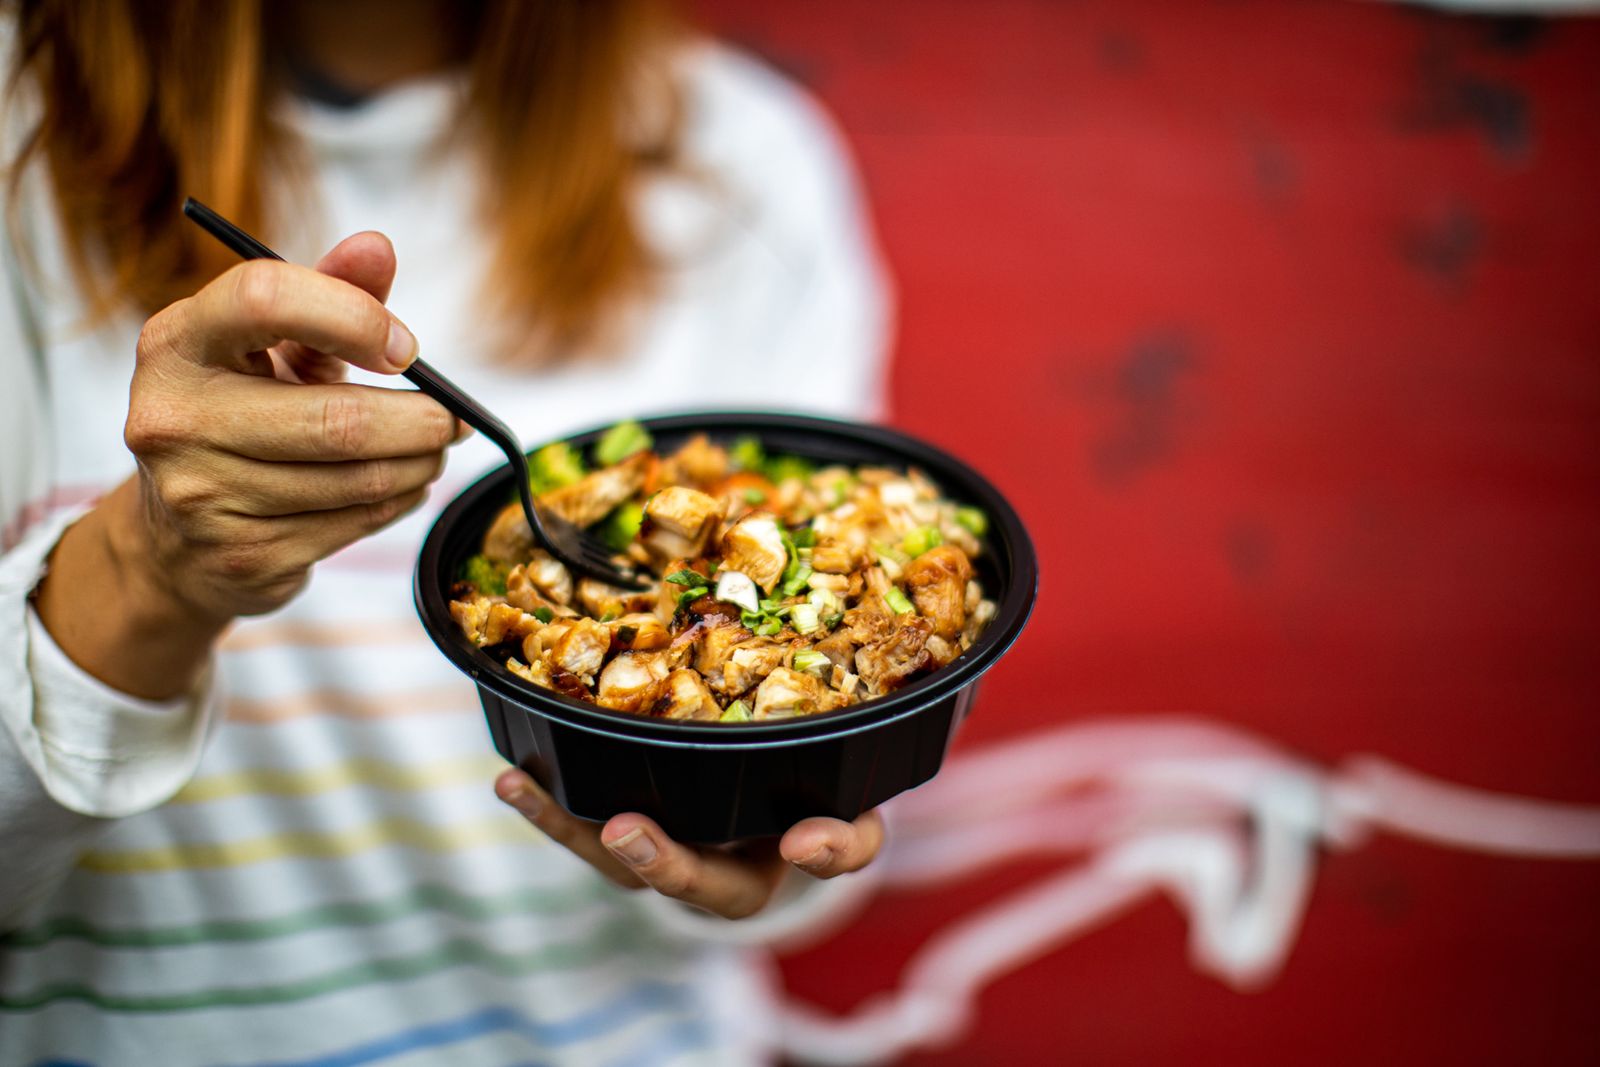 WaBa Grill Announces 2020 as Best Sales Year Ever!